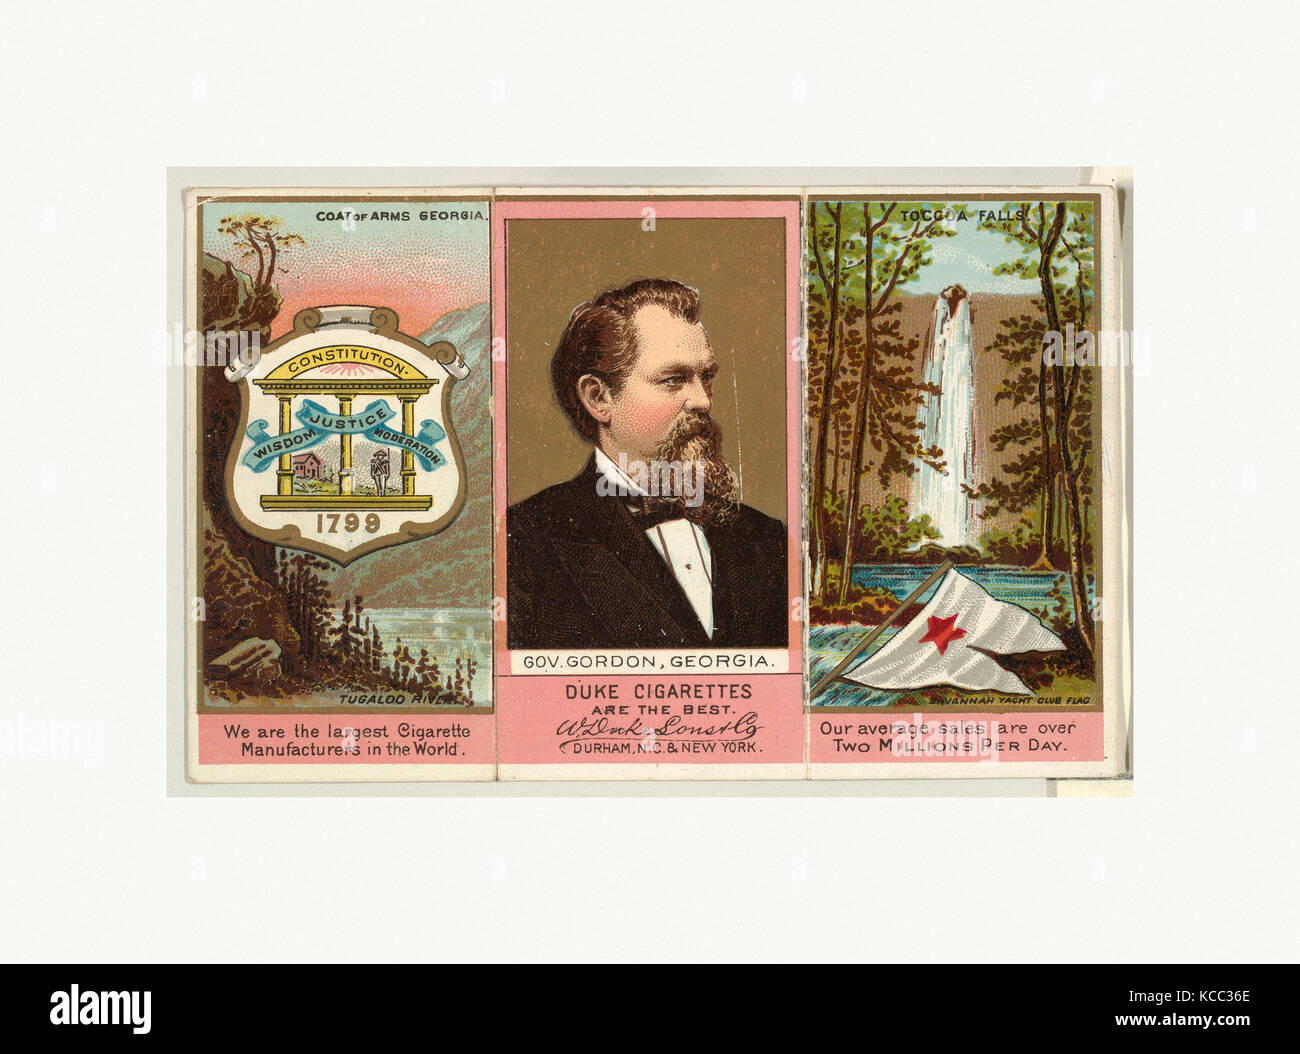 Governor Gordon, Georgia, from 'Governors, Arms, Etc.' series (N133-2), issued by Duke Sons & Co., ca. 1888 Stock Photo